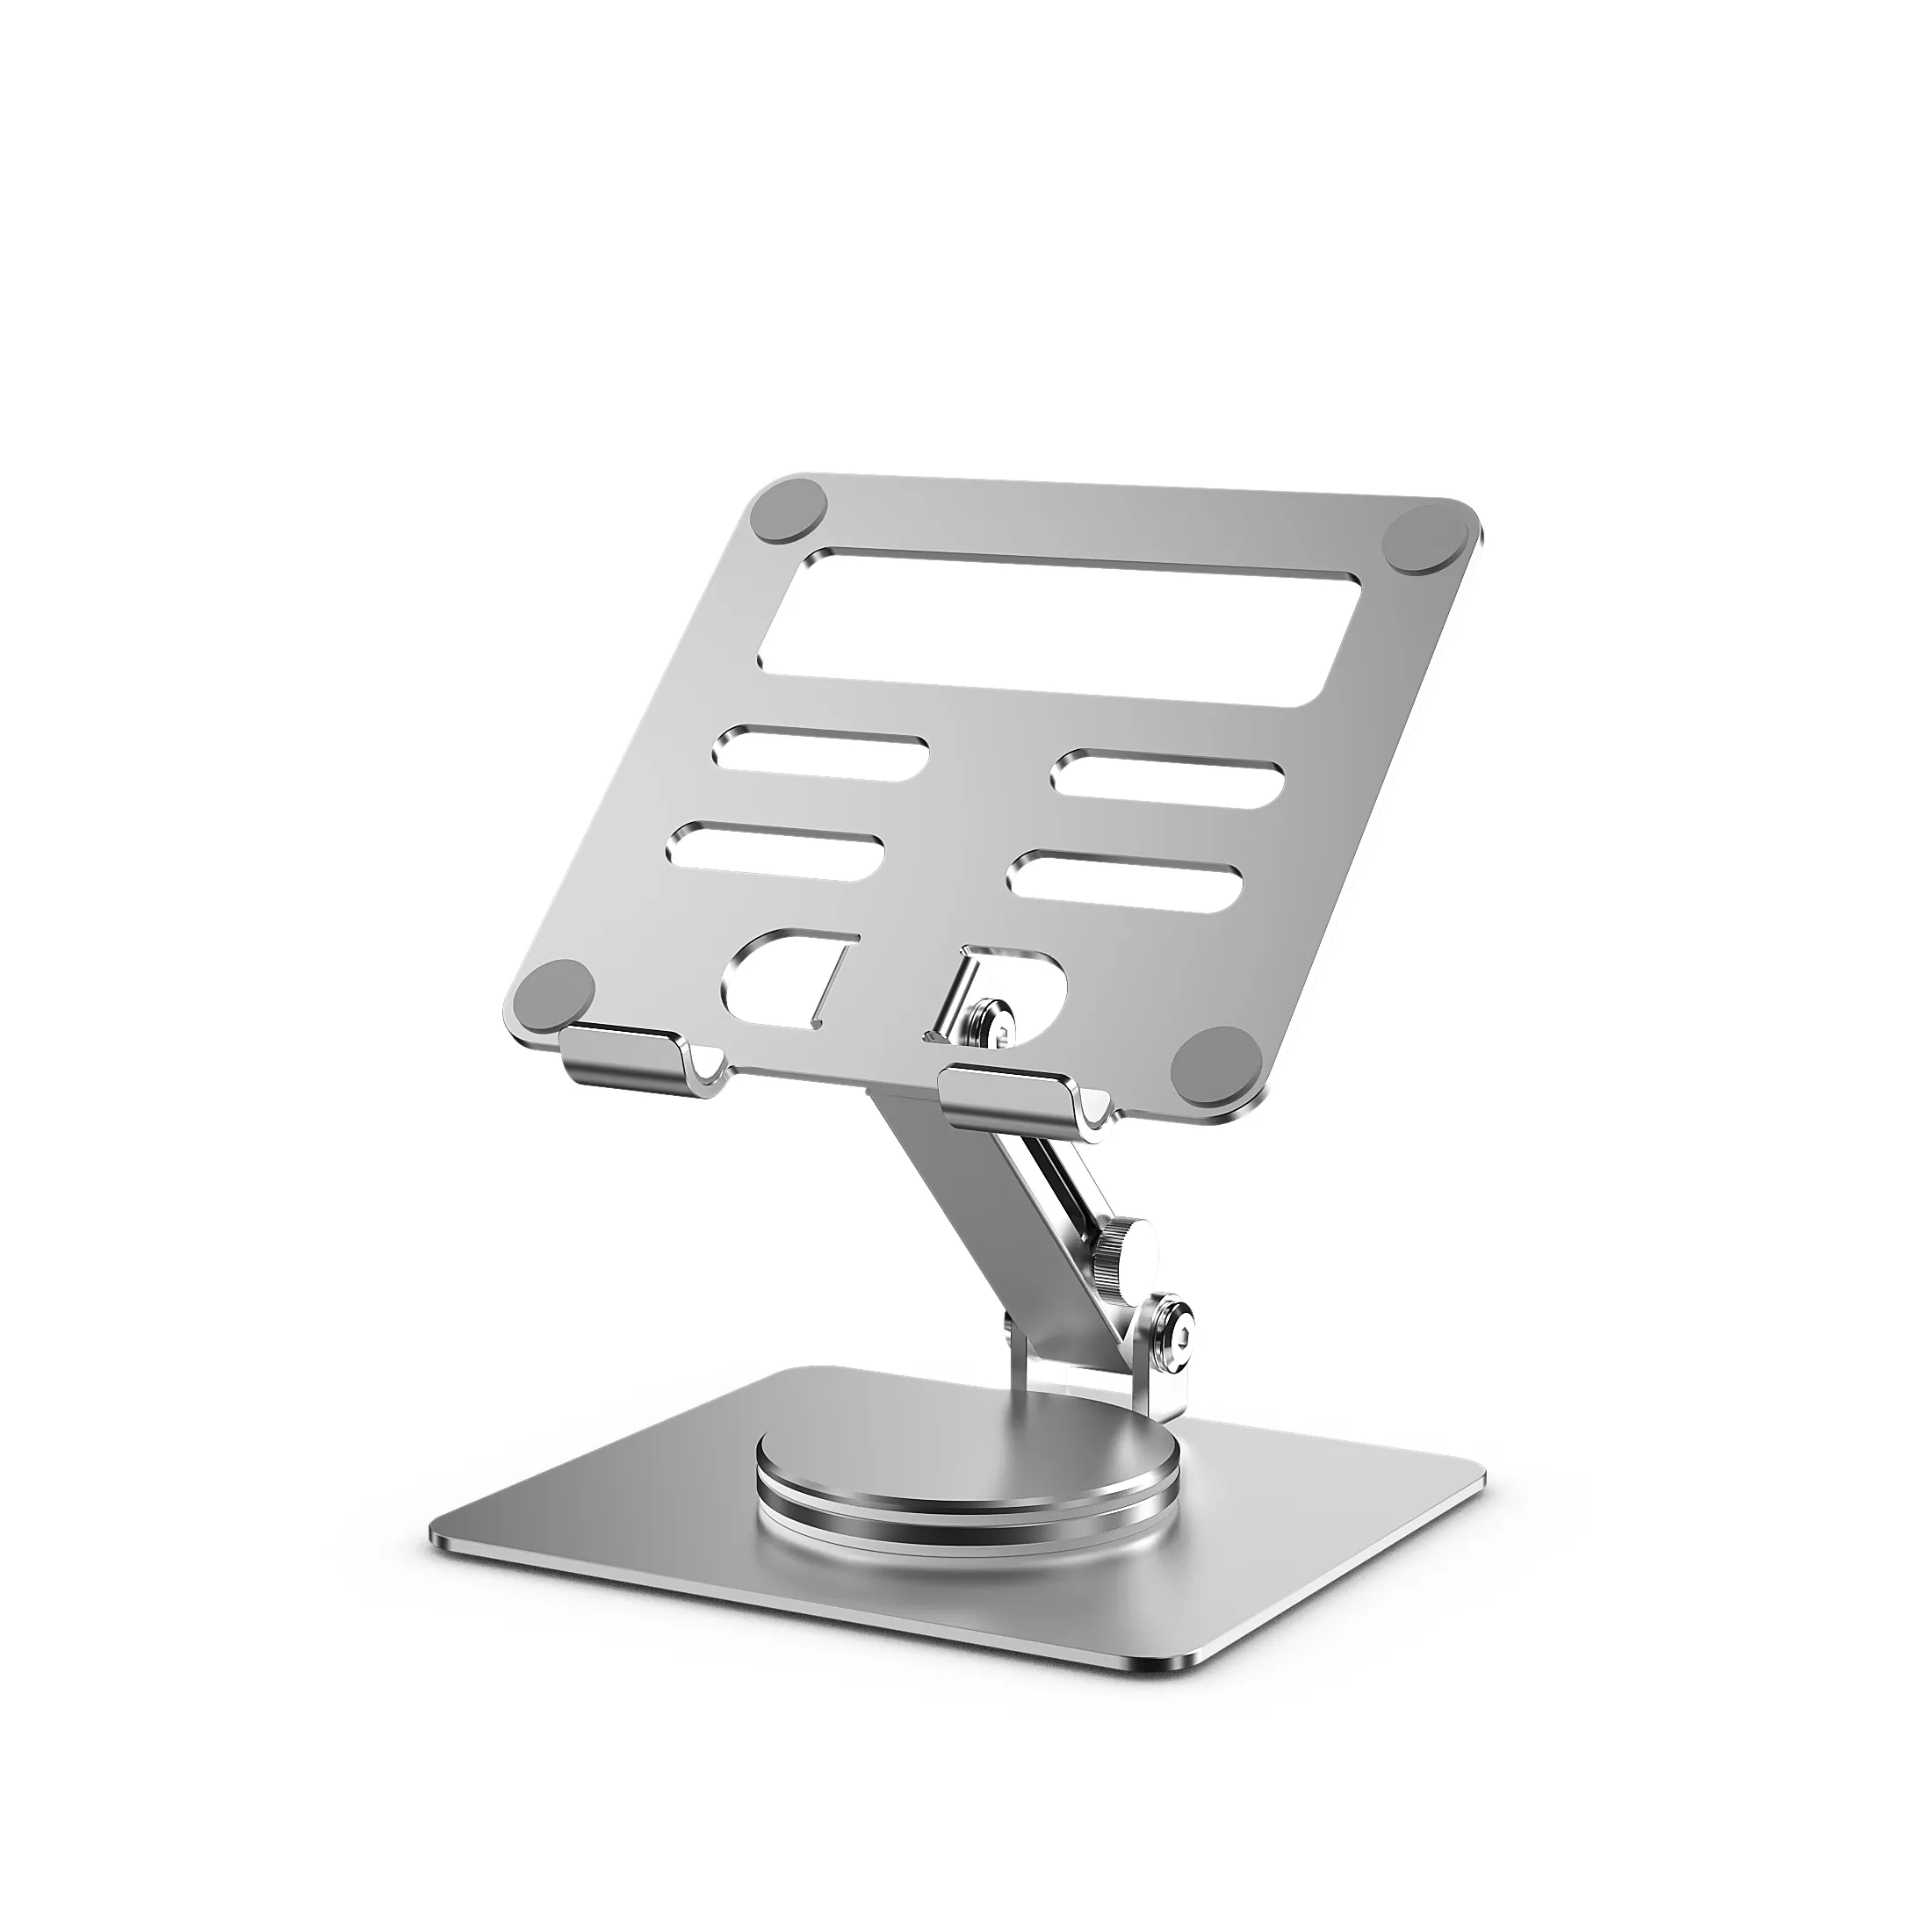 360 Rotating Aluminum Alloy Foldable PC Stand Accessories Flexible Lazy Tablet PC Bracket Adjustable Desk Bed Laptop Holder